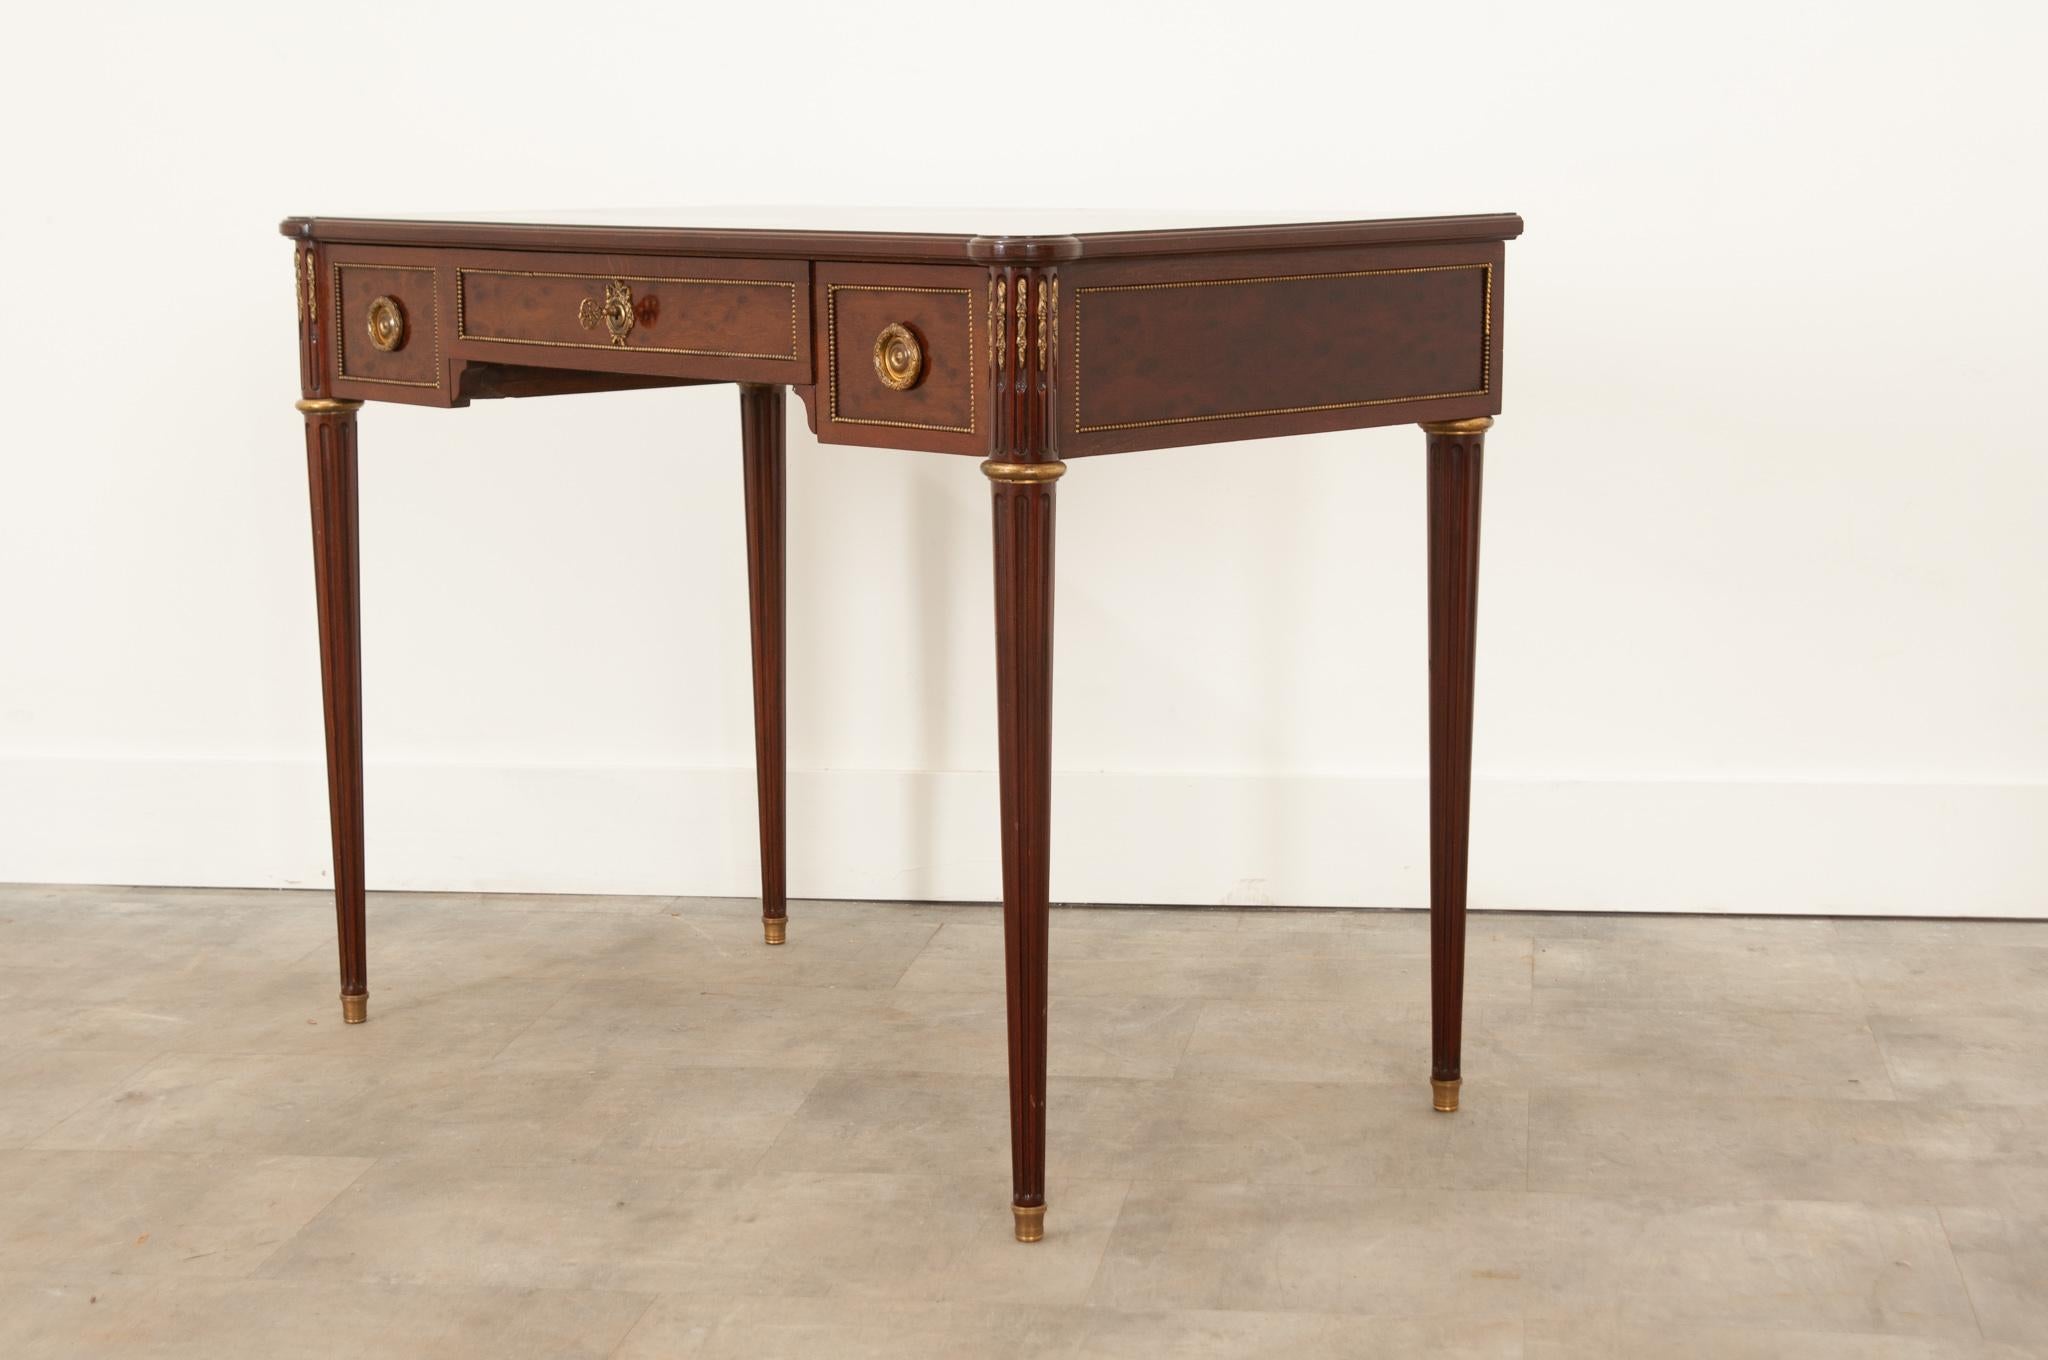 This striking bird’s-eye mahogany desk was crafted in France in the style of Louis XVI. The top is wonderfully smooth and displays the woodgrain beautifully. The apron houses three drawers, all with quality brass banding inset into the paneling. The